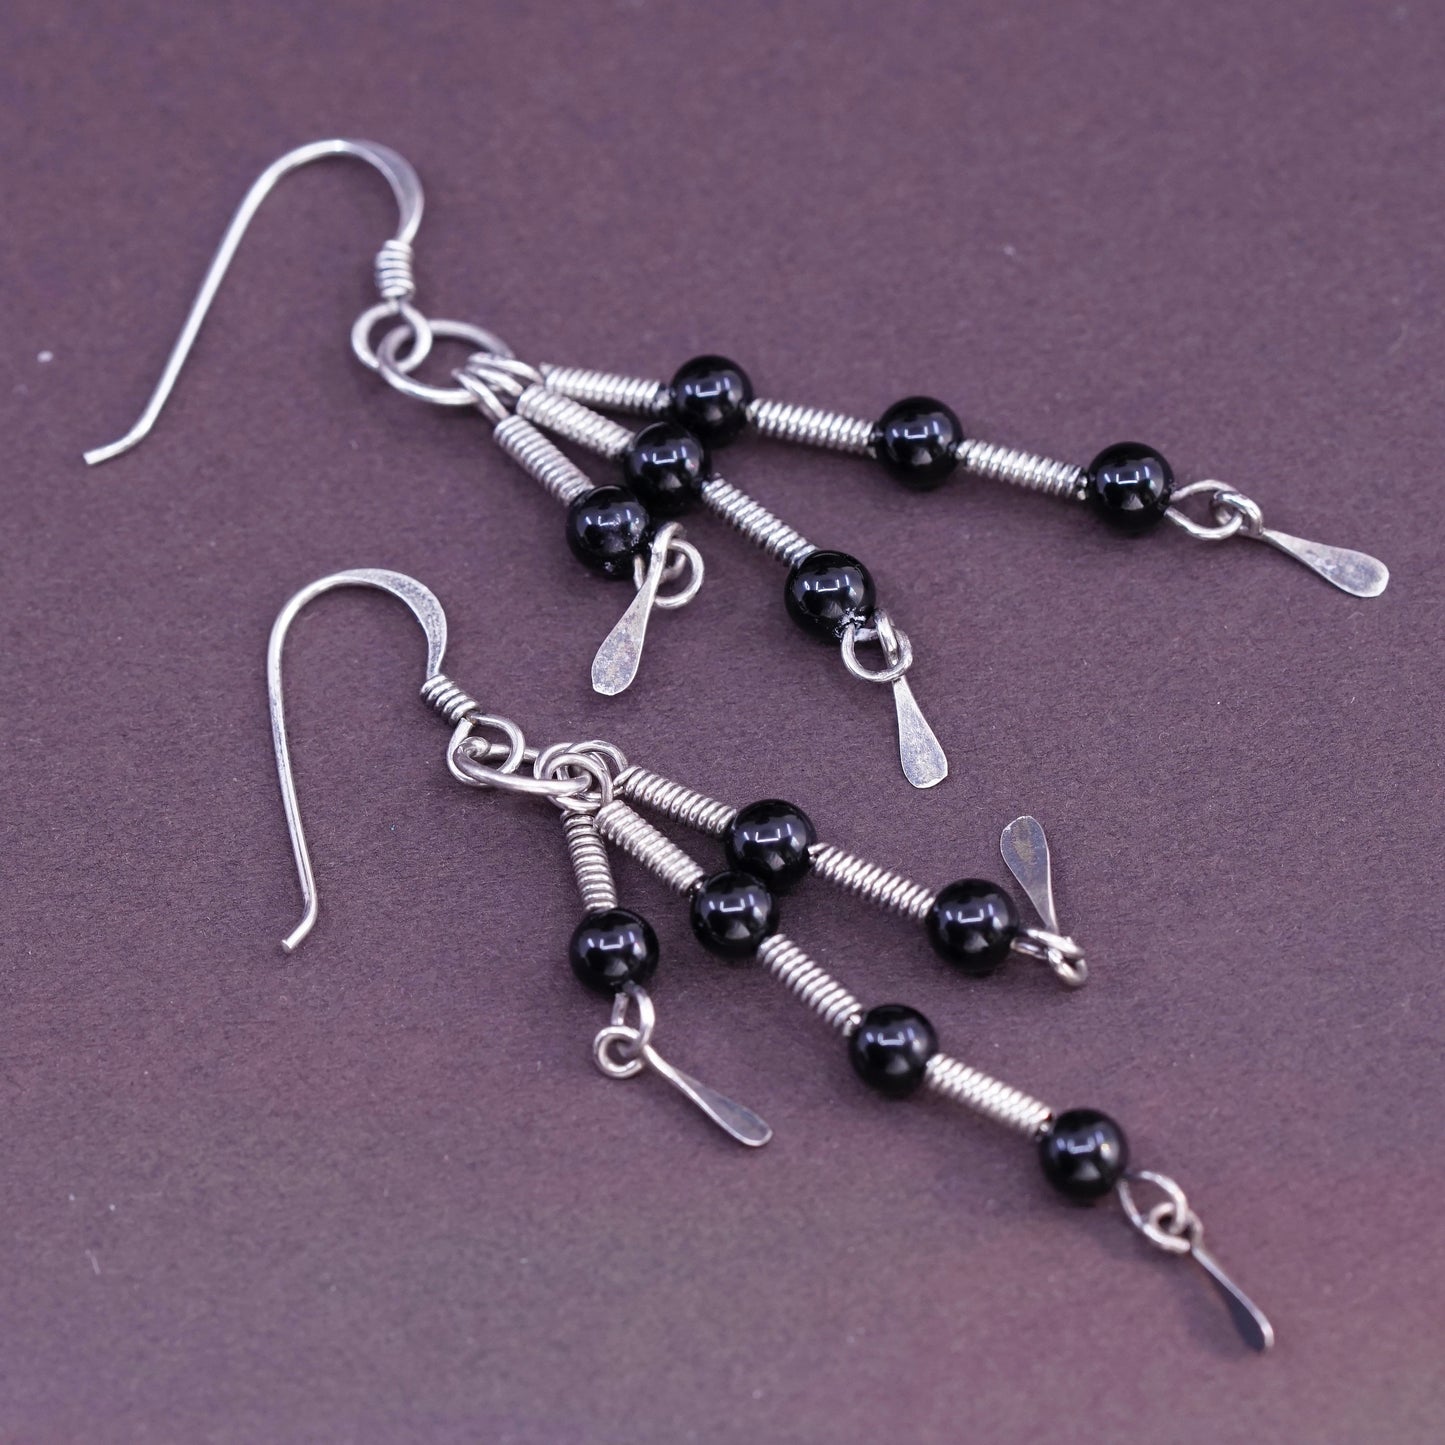 Vintage Sterling silver handmade earrings, Mexico 925 with bead obsidian